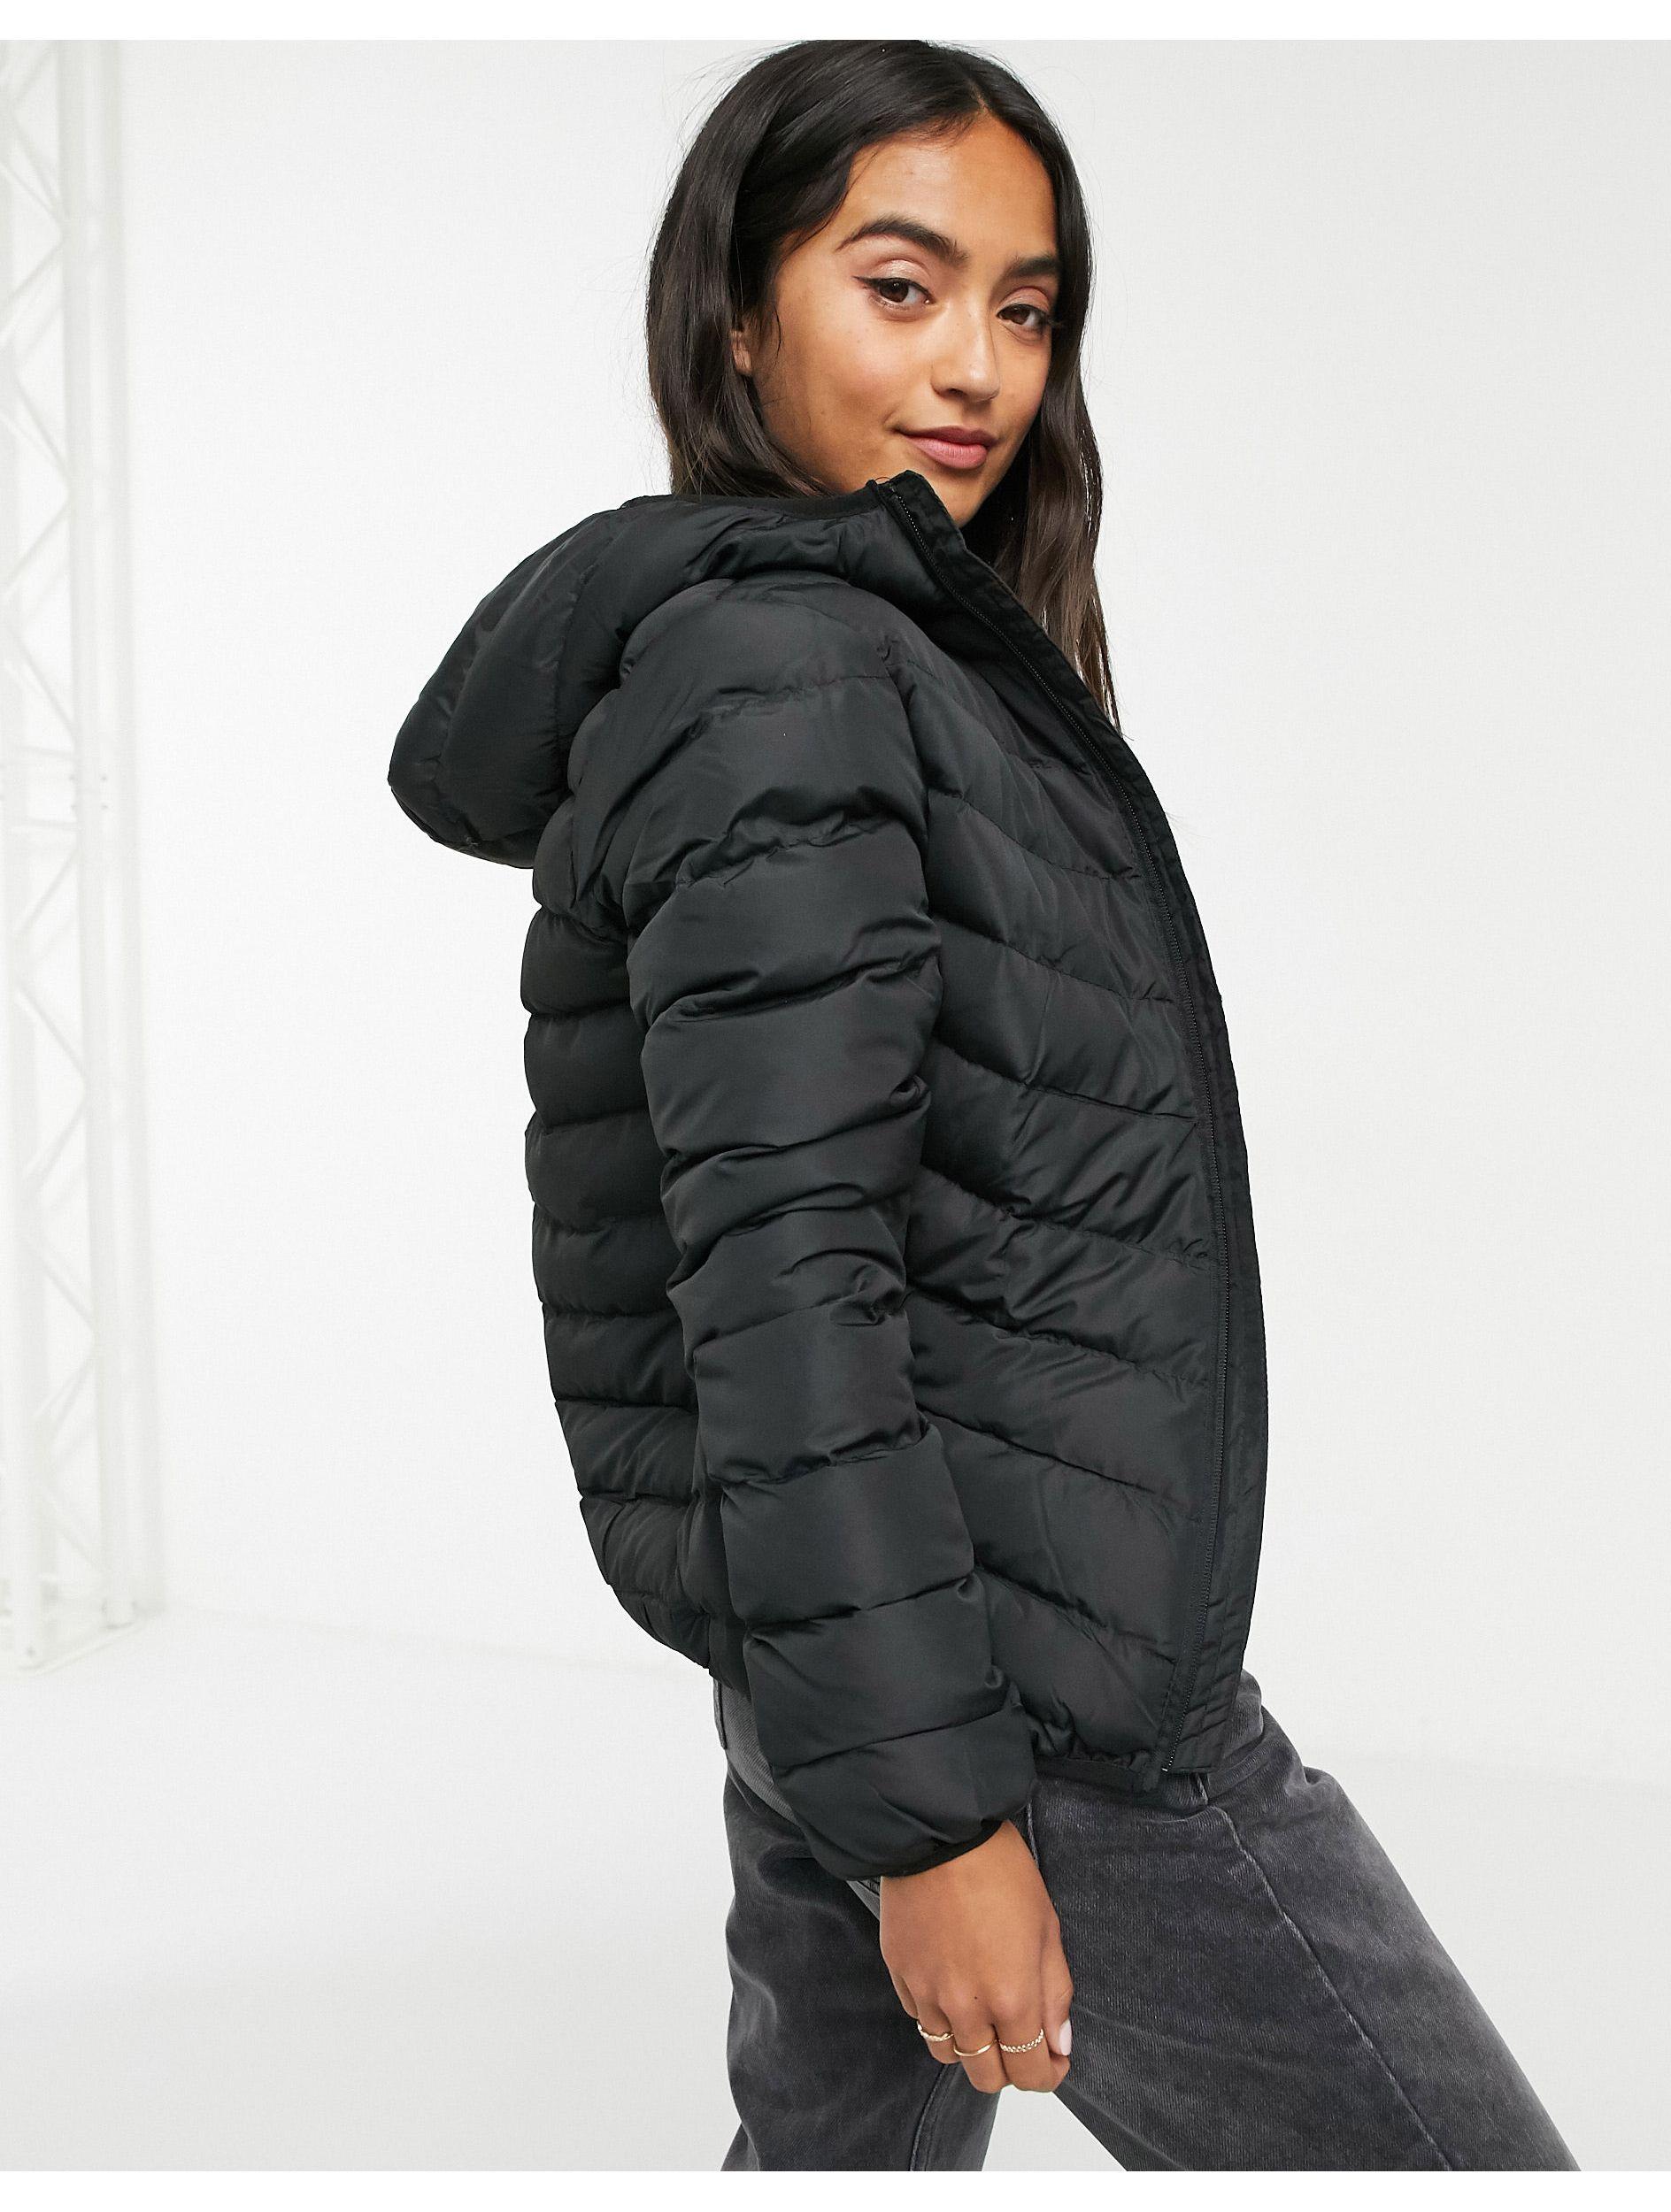 Brave Soul Hooded Puffer Jacket Hotsell, SAVE 49% - eagleflair.com